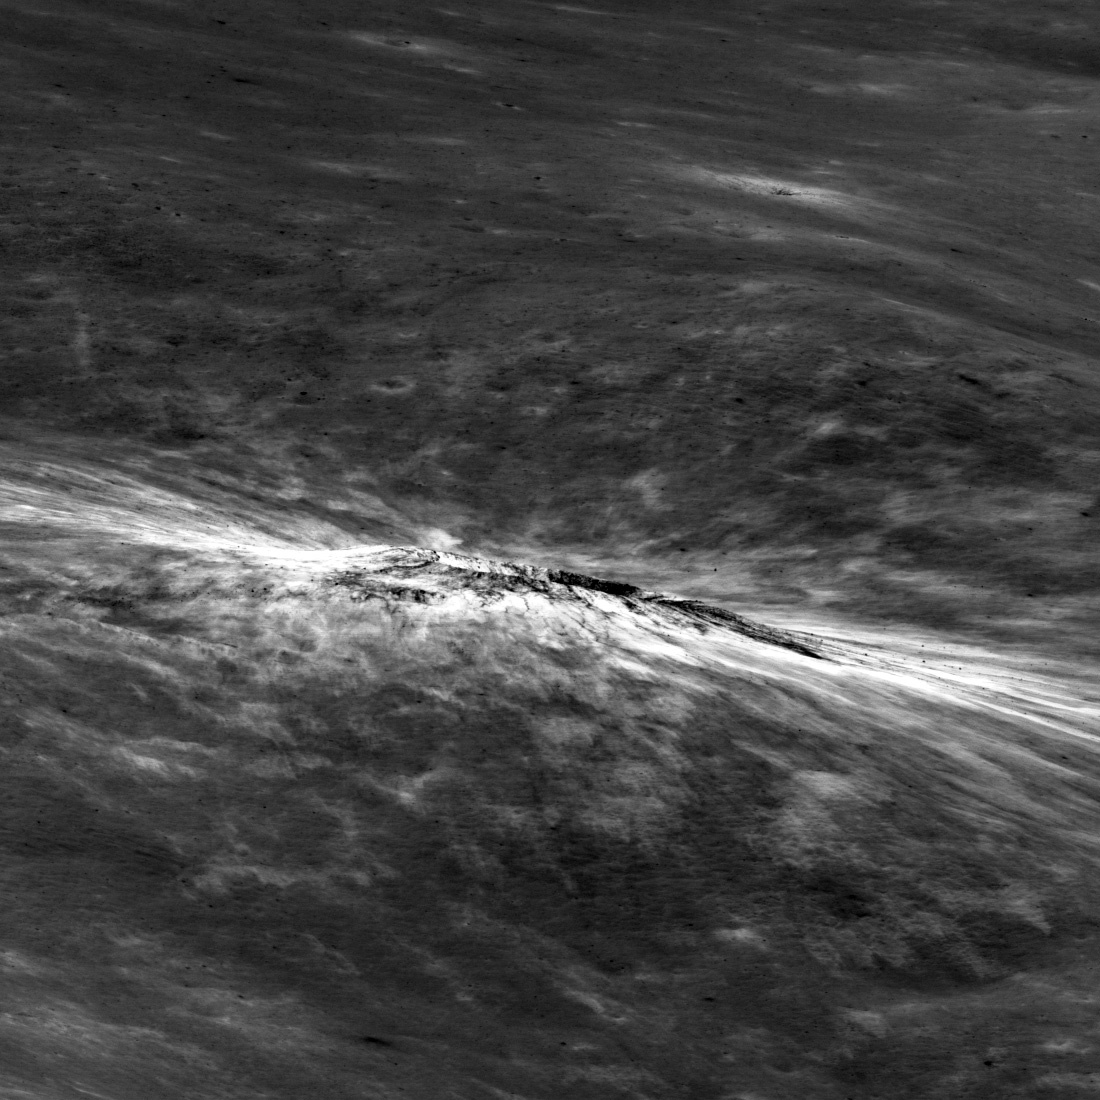 Crater seen almost edge on, on a gray, marbled-looking plain, with bright streaks extending from its rim